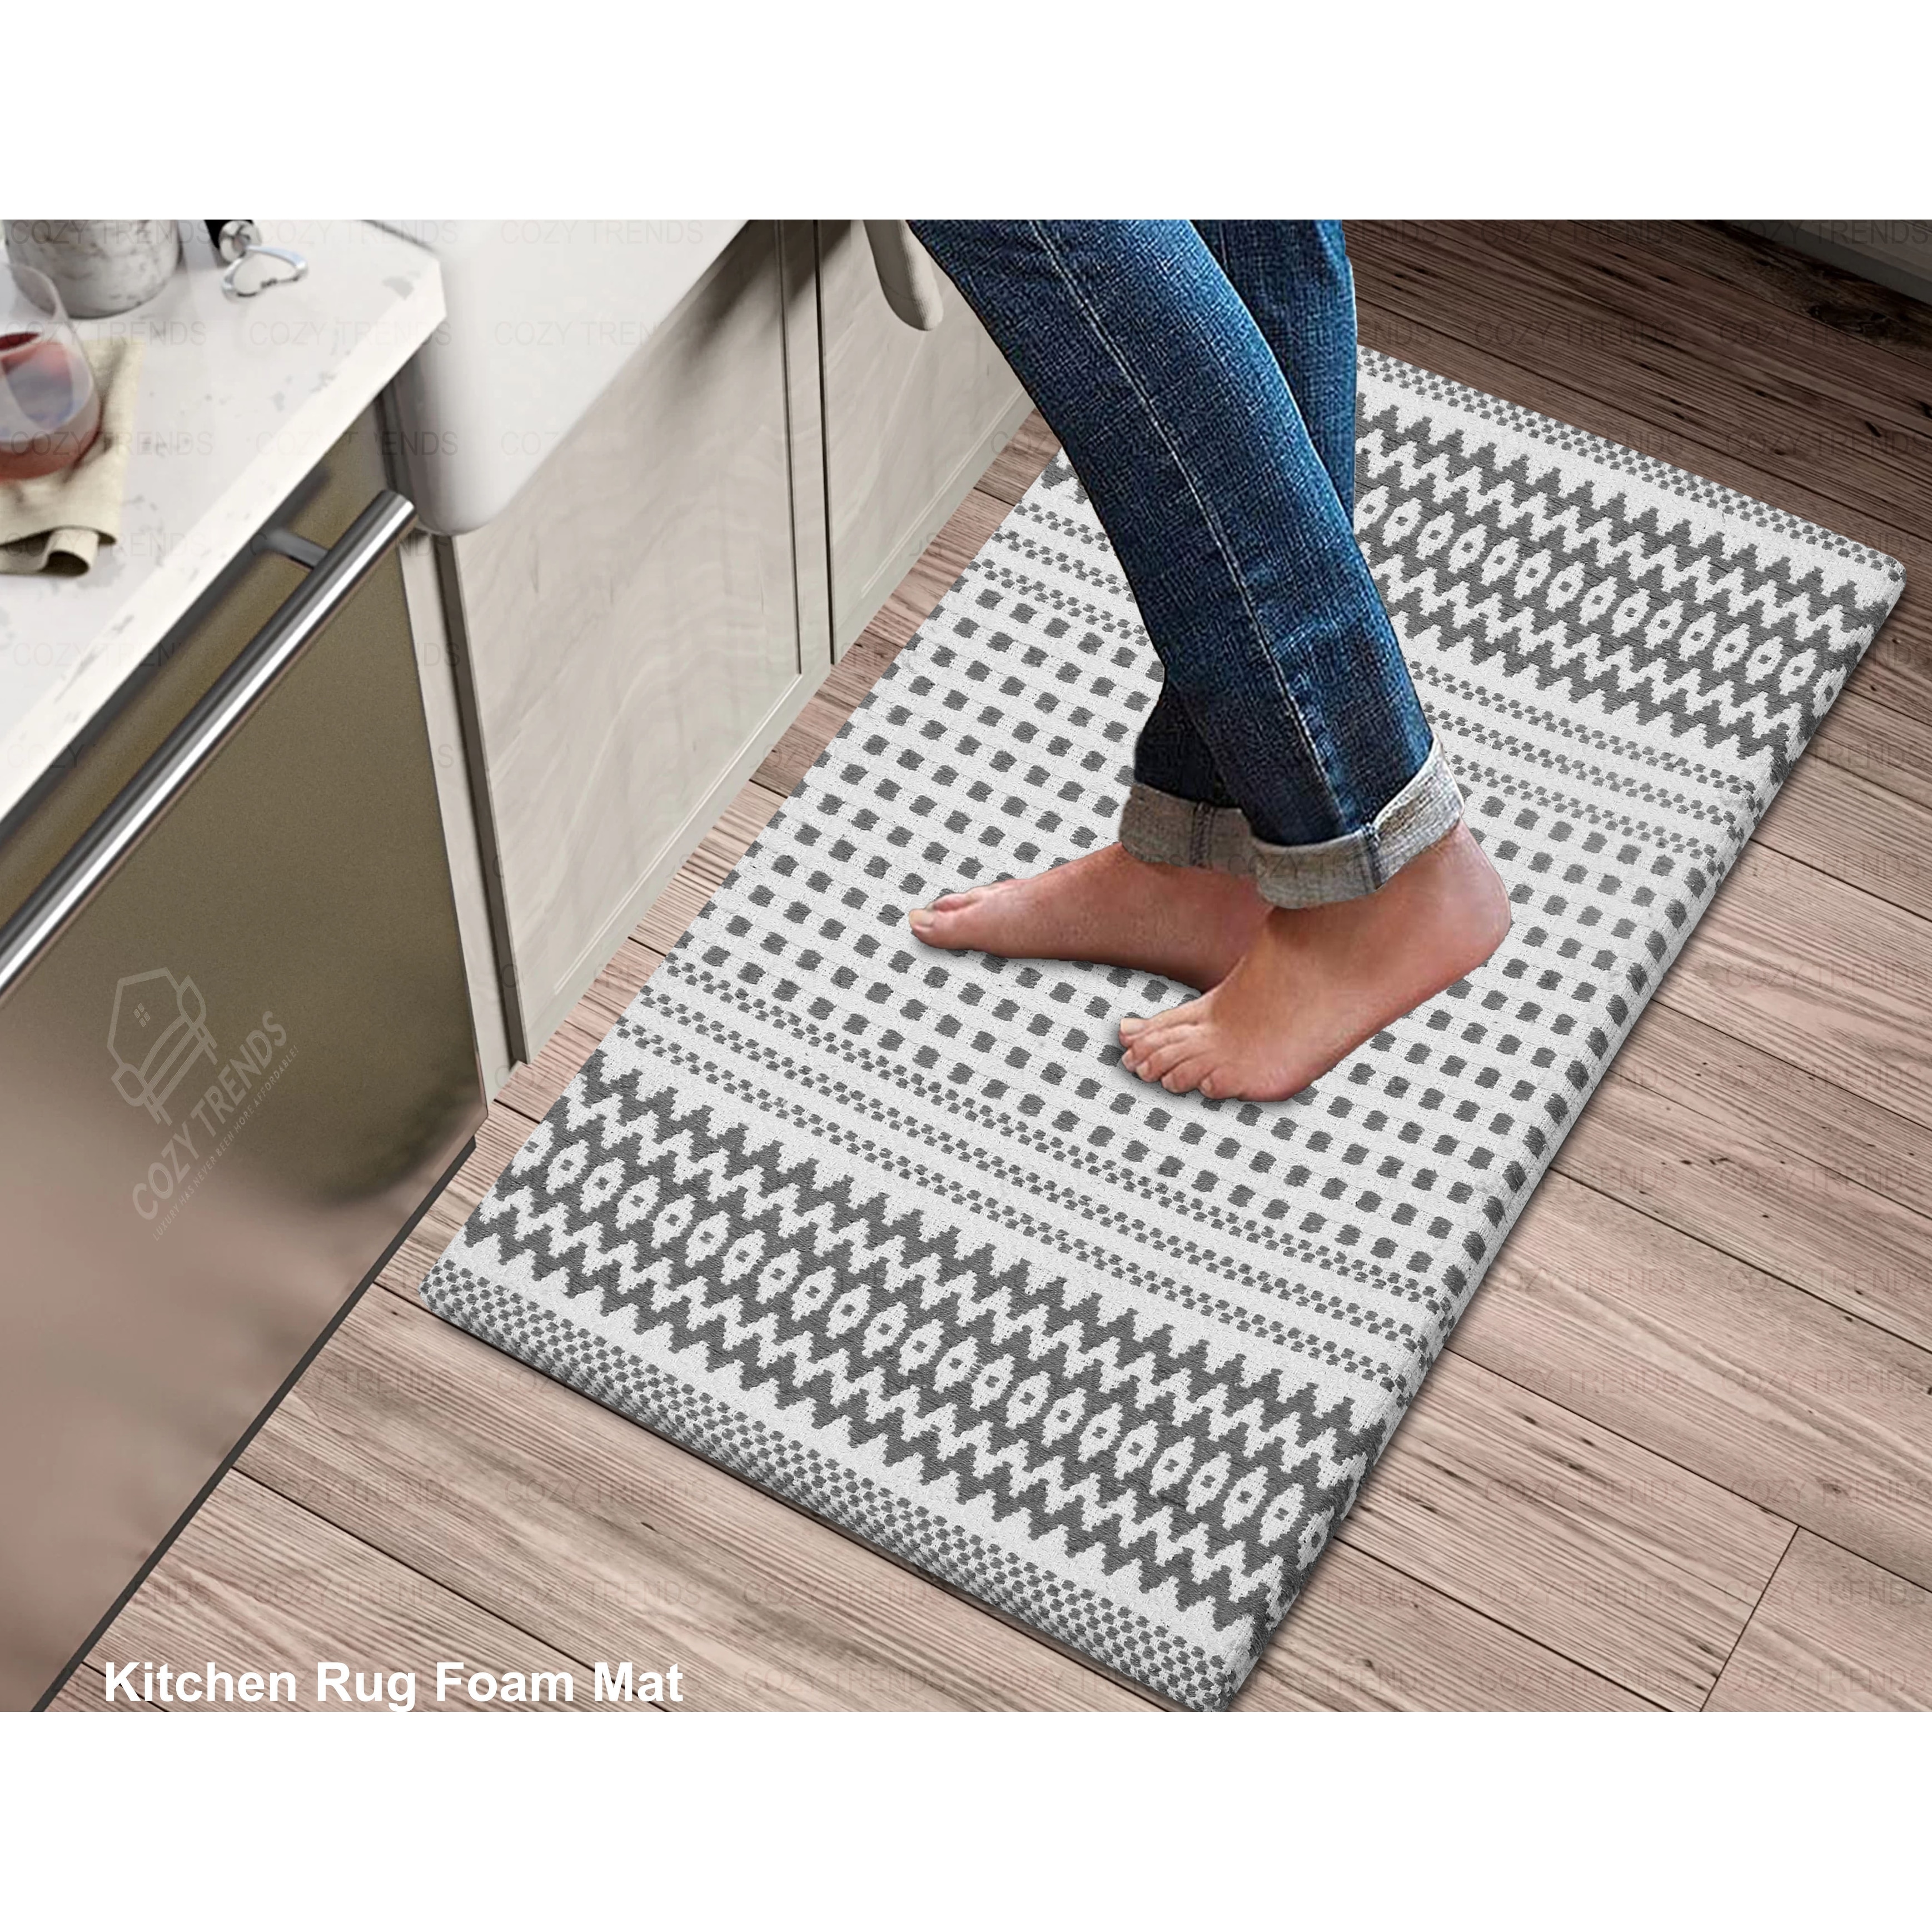 https://ak1.ostkcdn.com/images/products/is/images/direct/970b2de1410b0af8d85c9af53a9999eee66add74/Kitchen-Mat-Cushioned-Anti-Fatigue-Kitchen-Rug%2C-Non-Slip-Mats-Comfort-Foam-Rug-for-Kitchen%2C-Office%2C-Sink%2C-Laundry---18%27%27x30%27%27.jpg